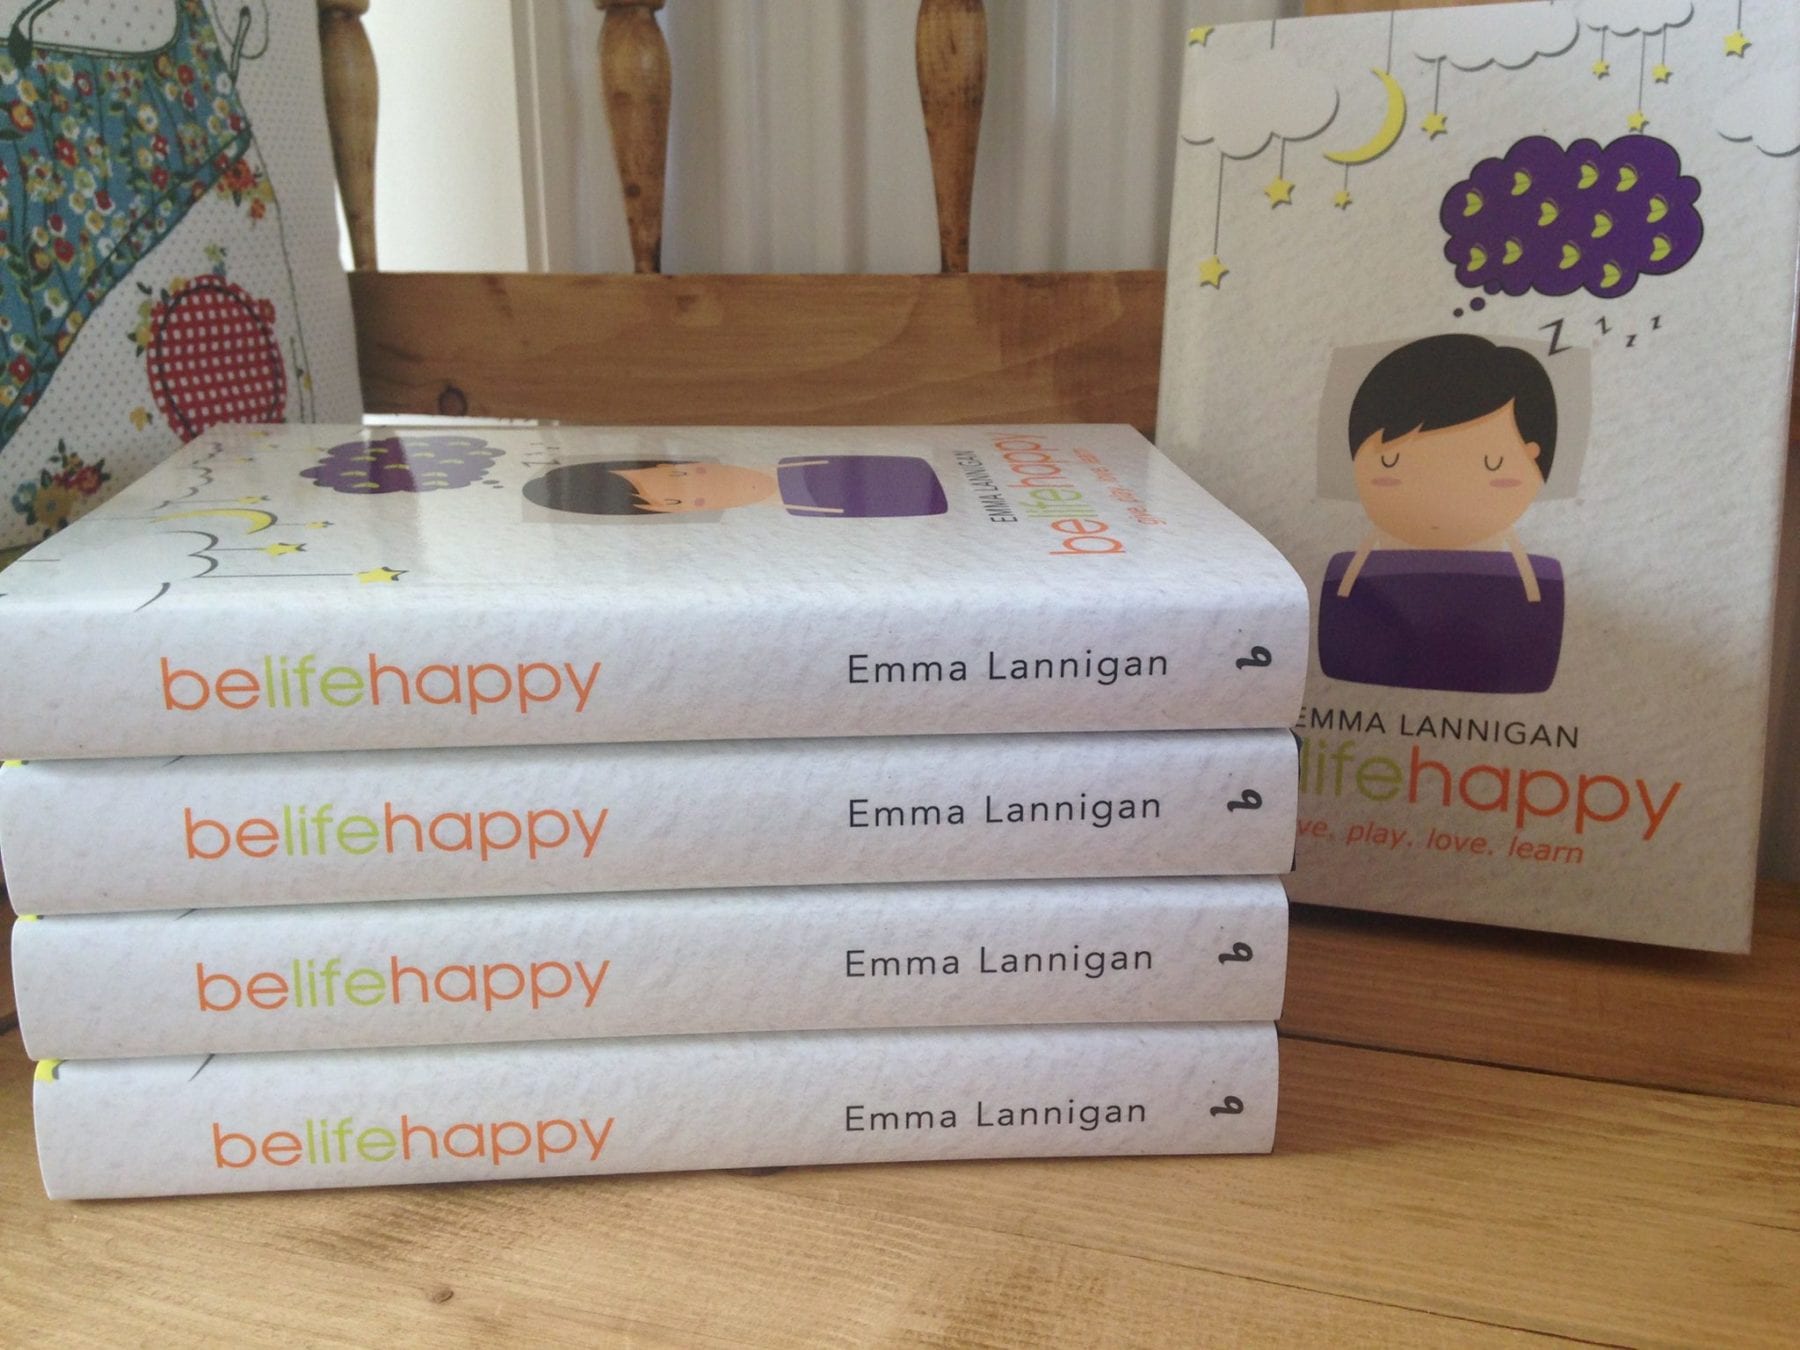 belifehappy give play love learn by Emma Lannigan